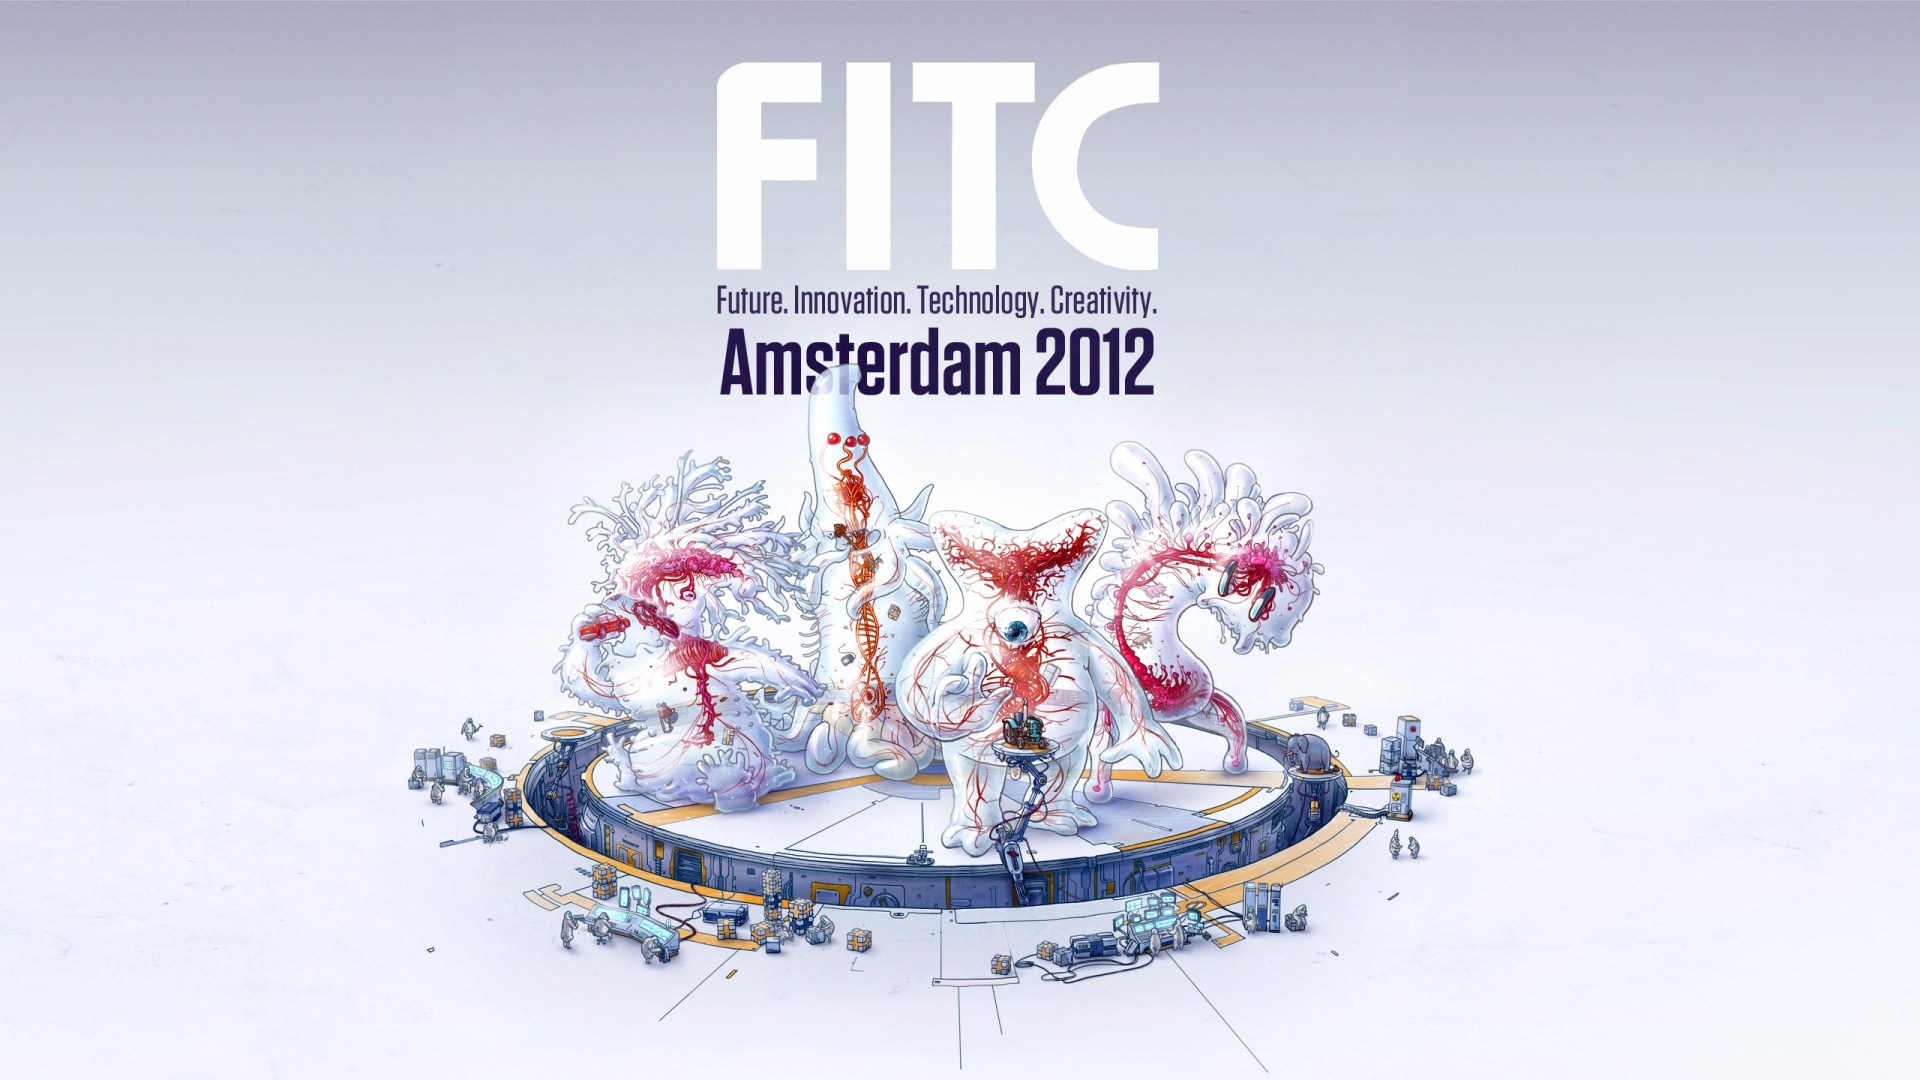 FITC 2012 Amsterdam for 1920 x 1080 HDTV 1080p resolution